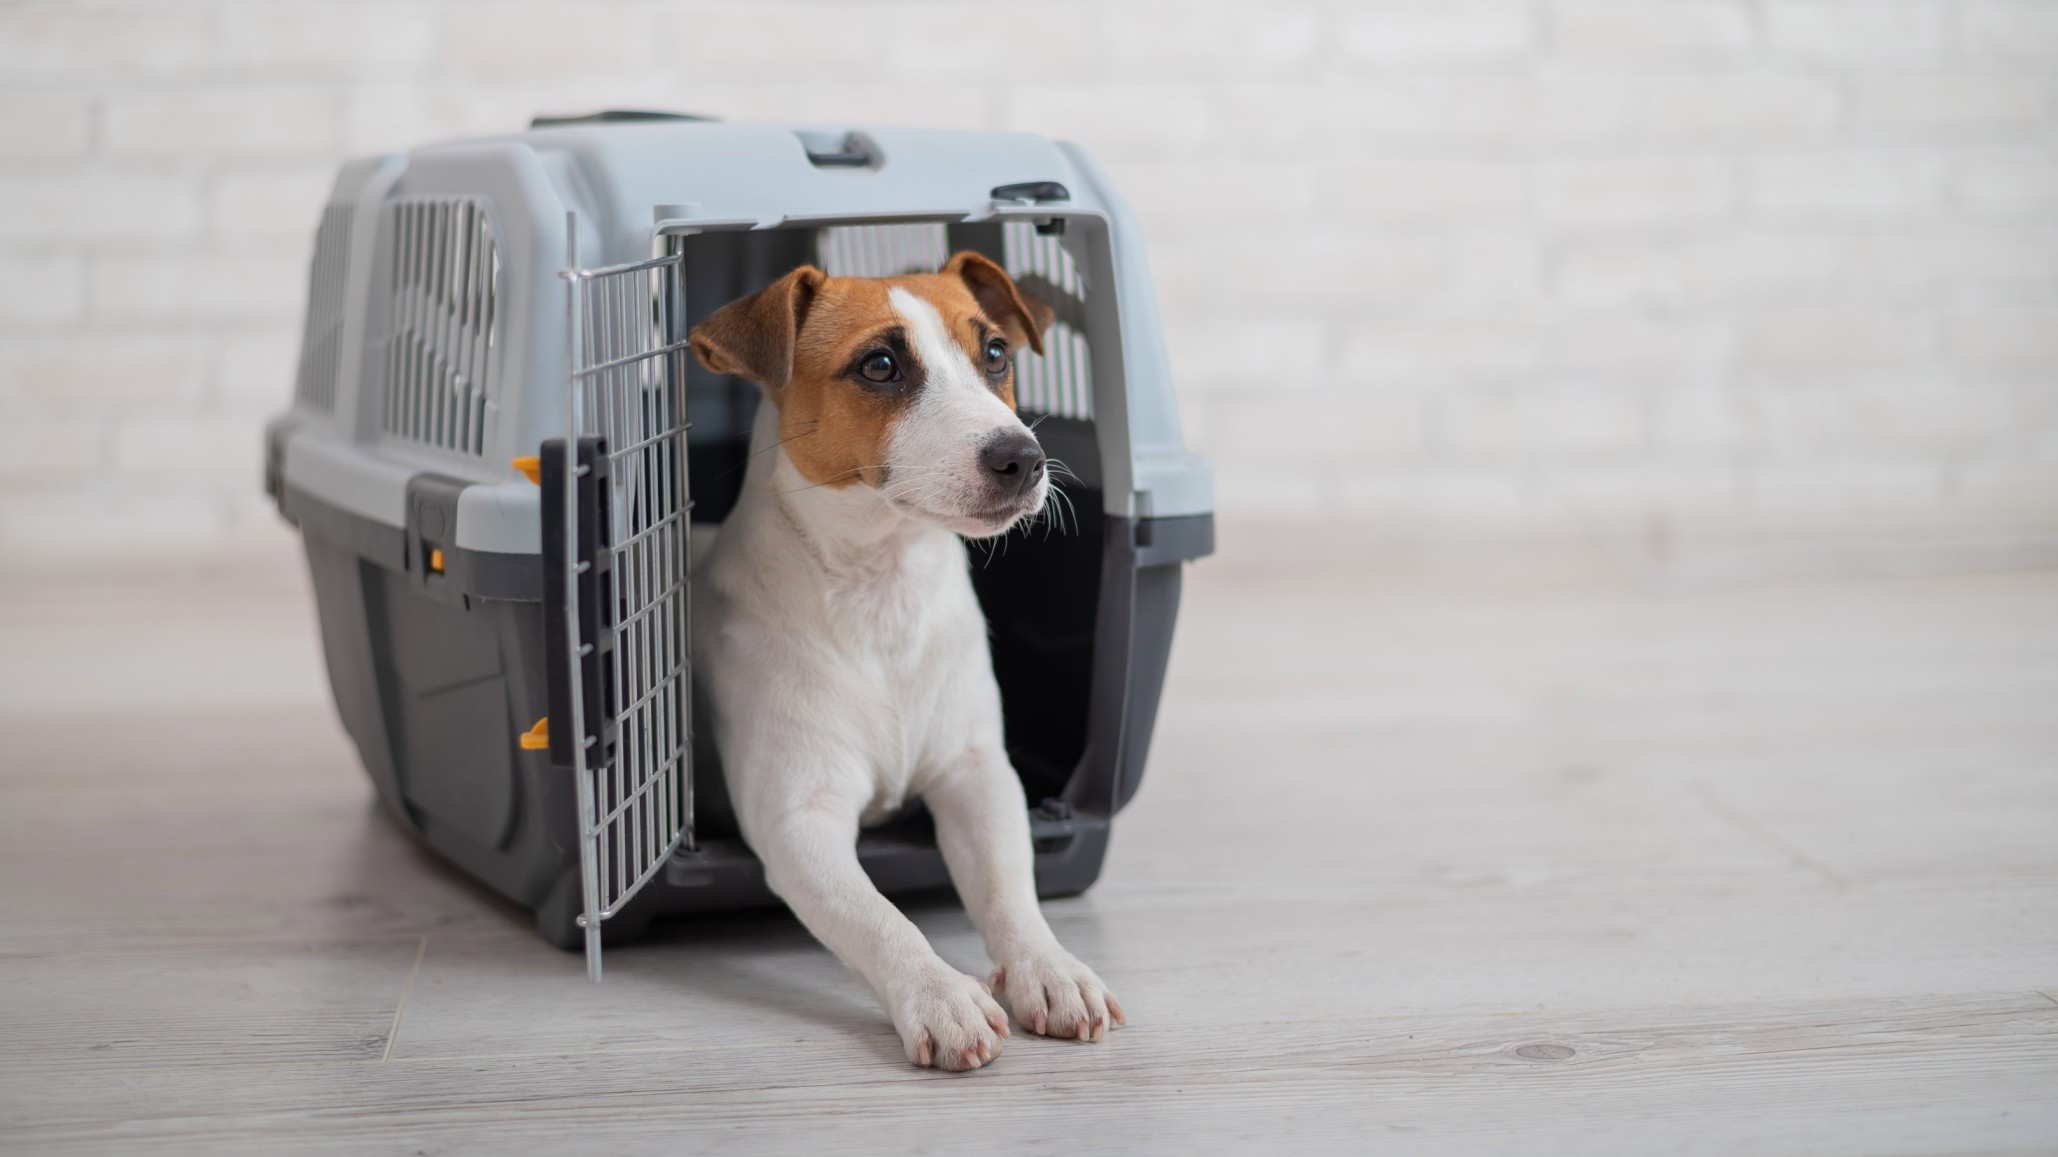 A dog sitting in an open travel carrier